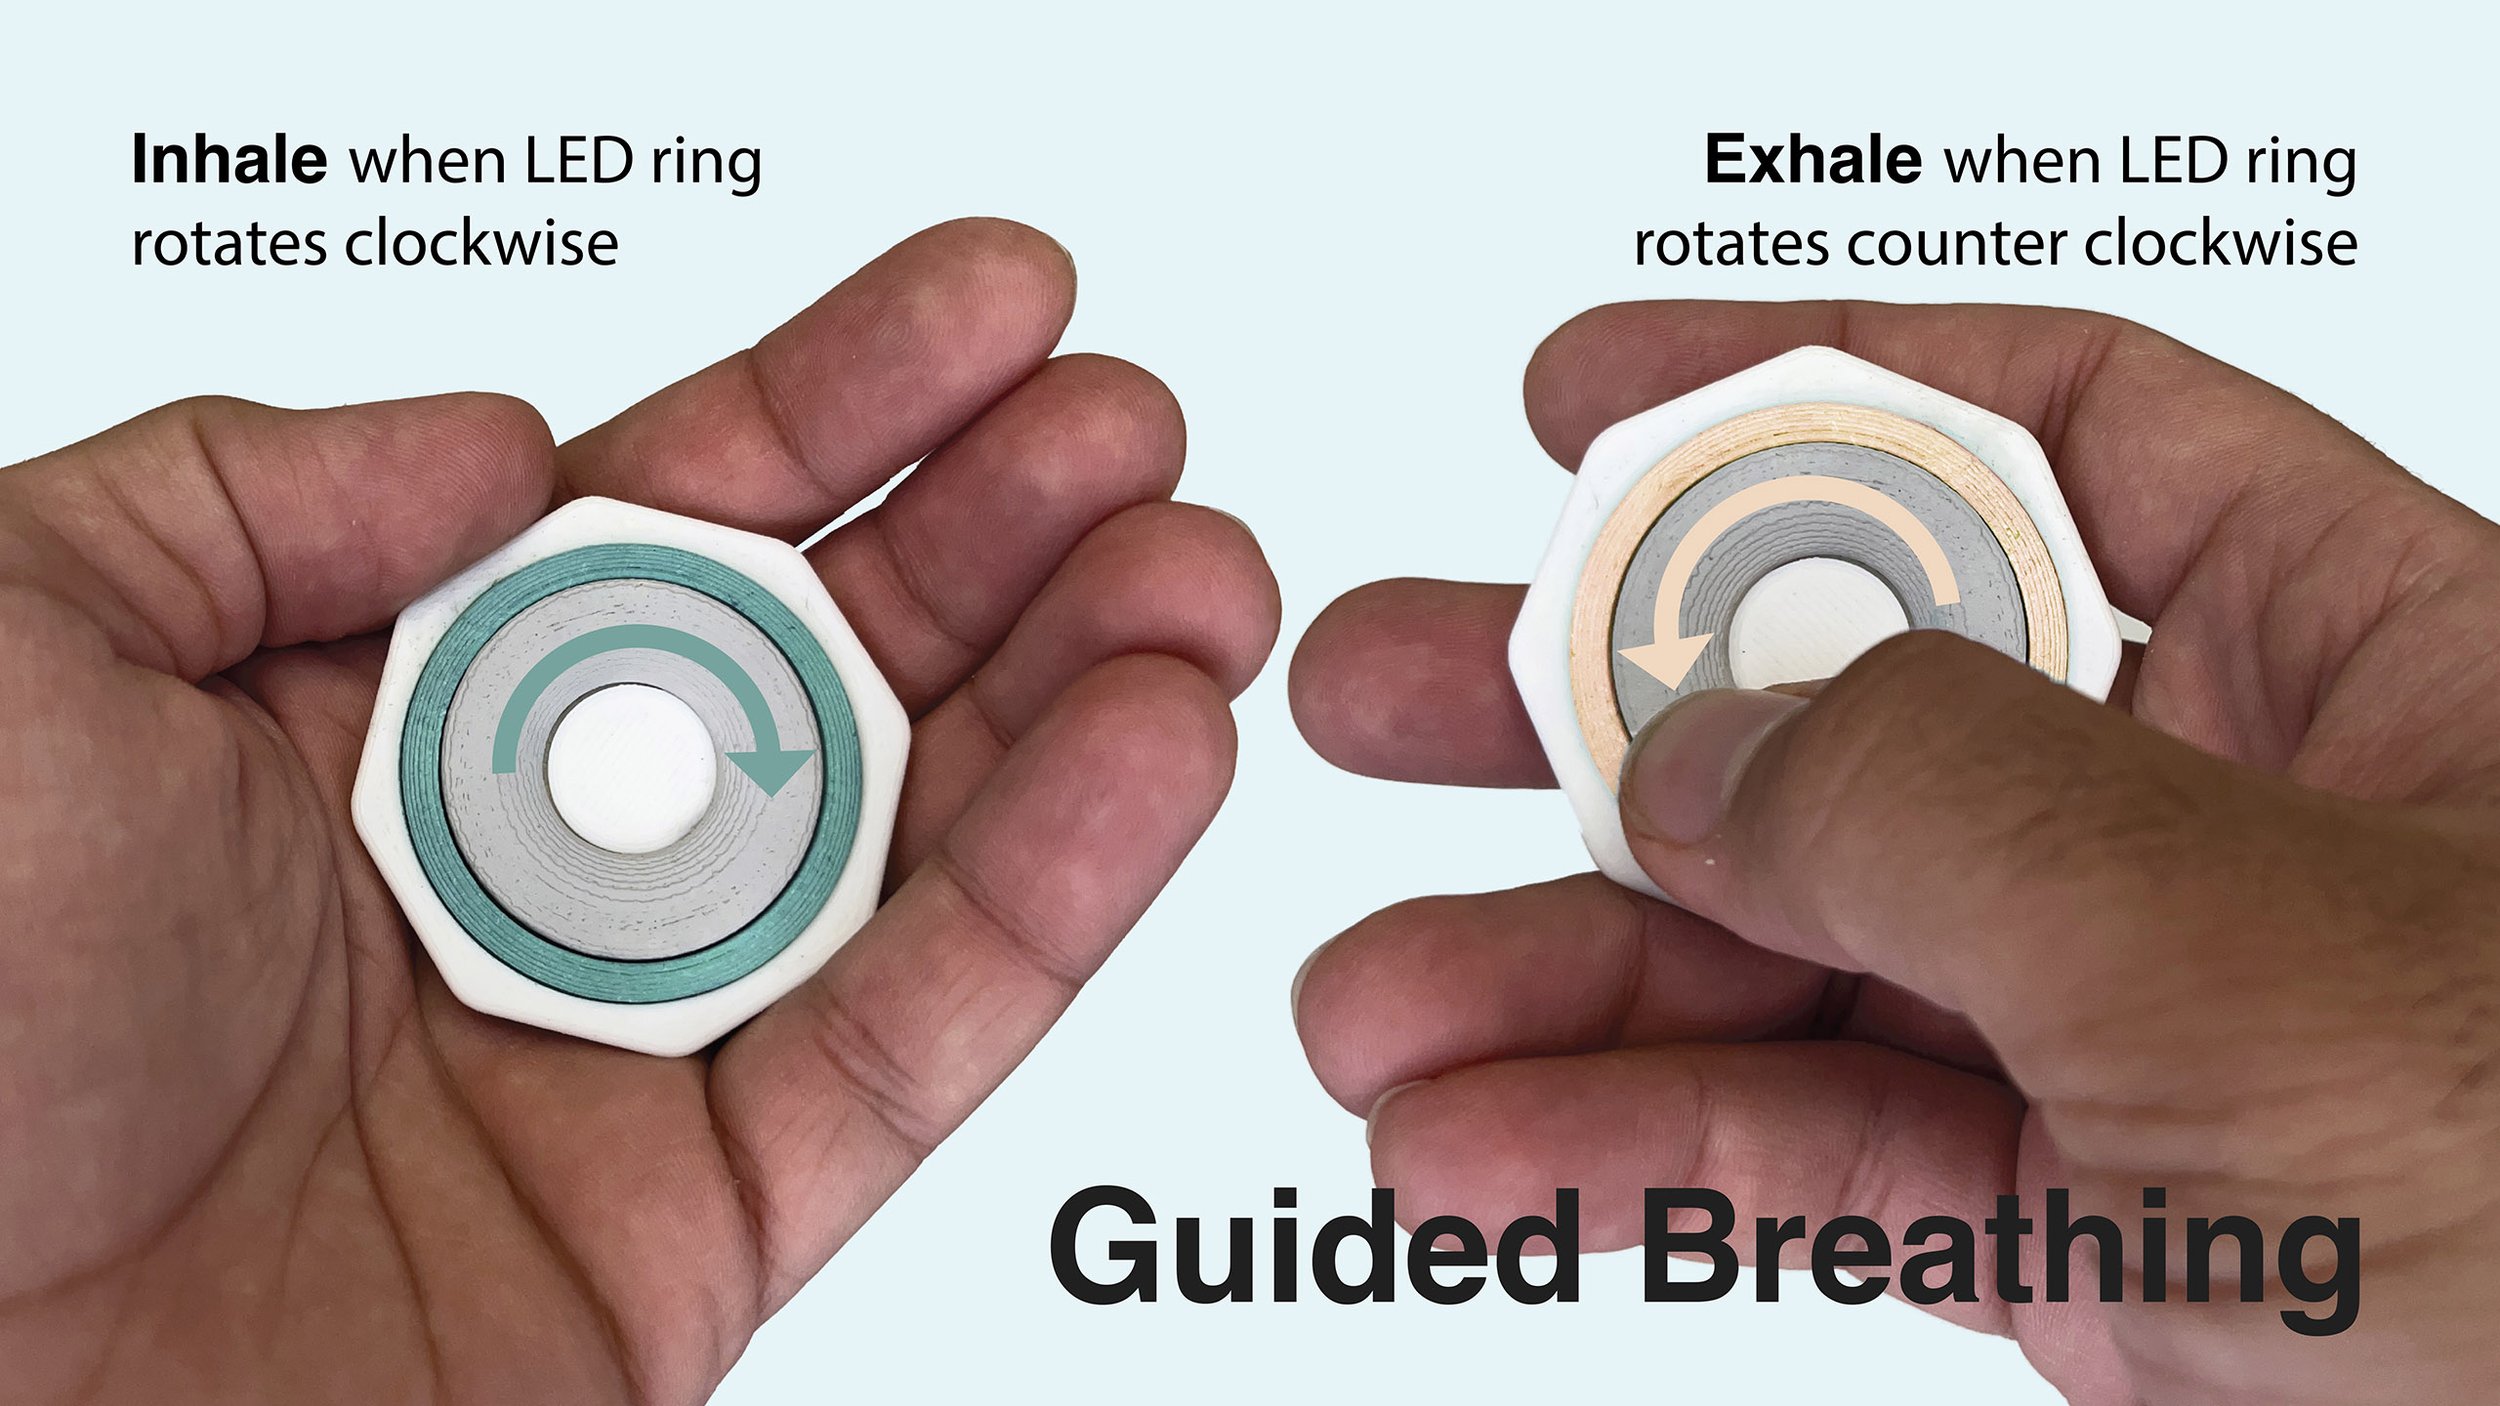 A magnetic device that monitors health.